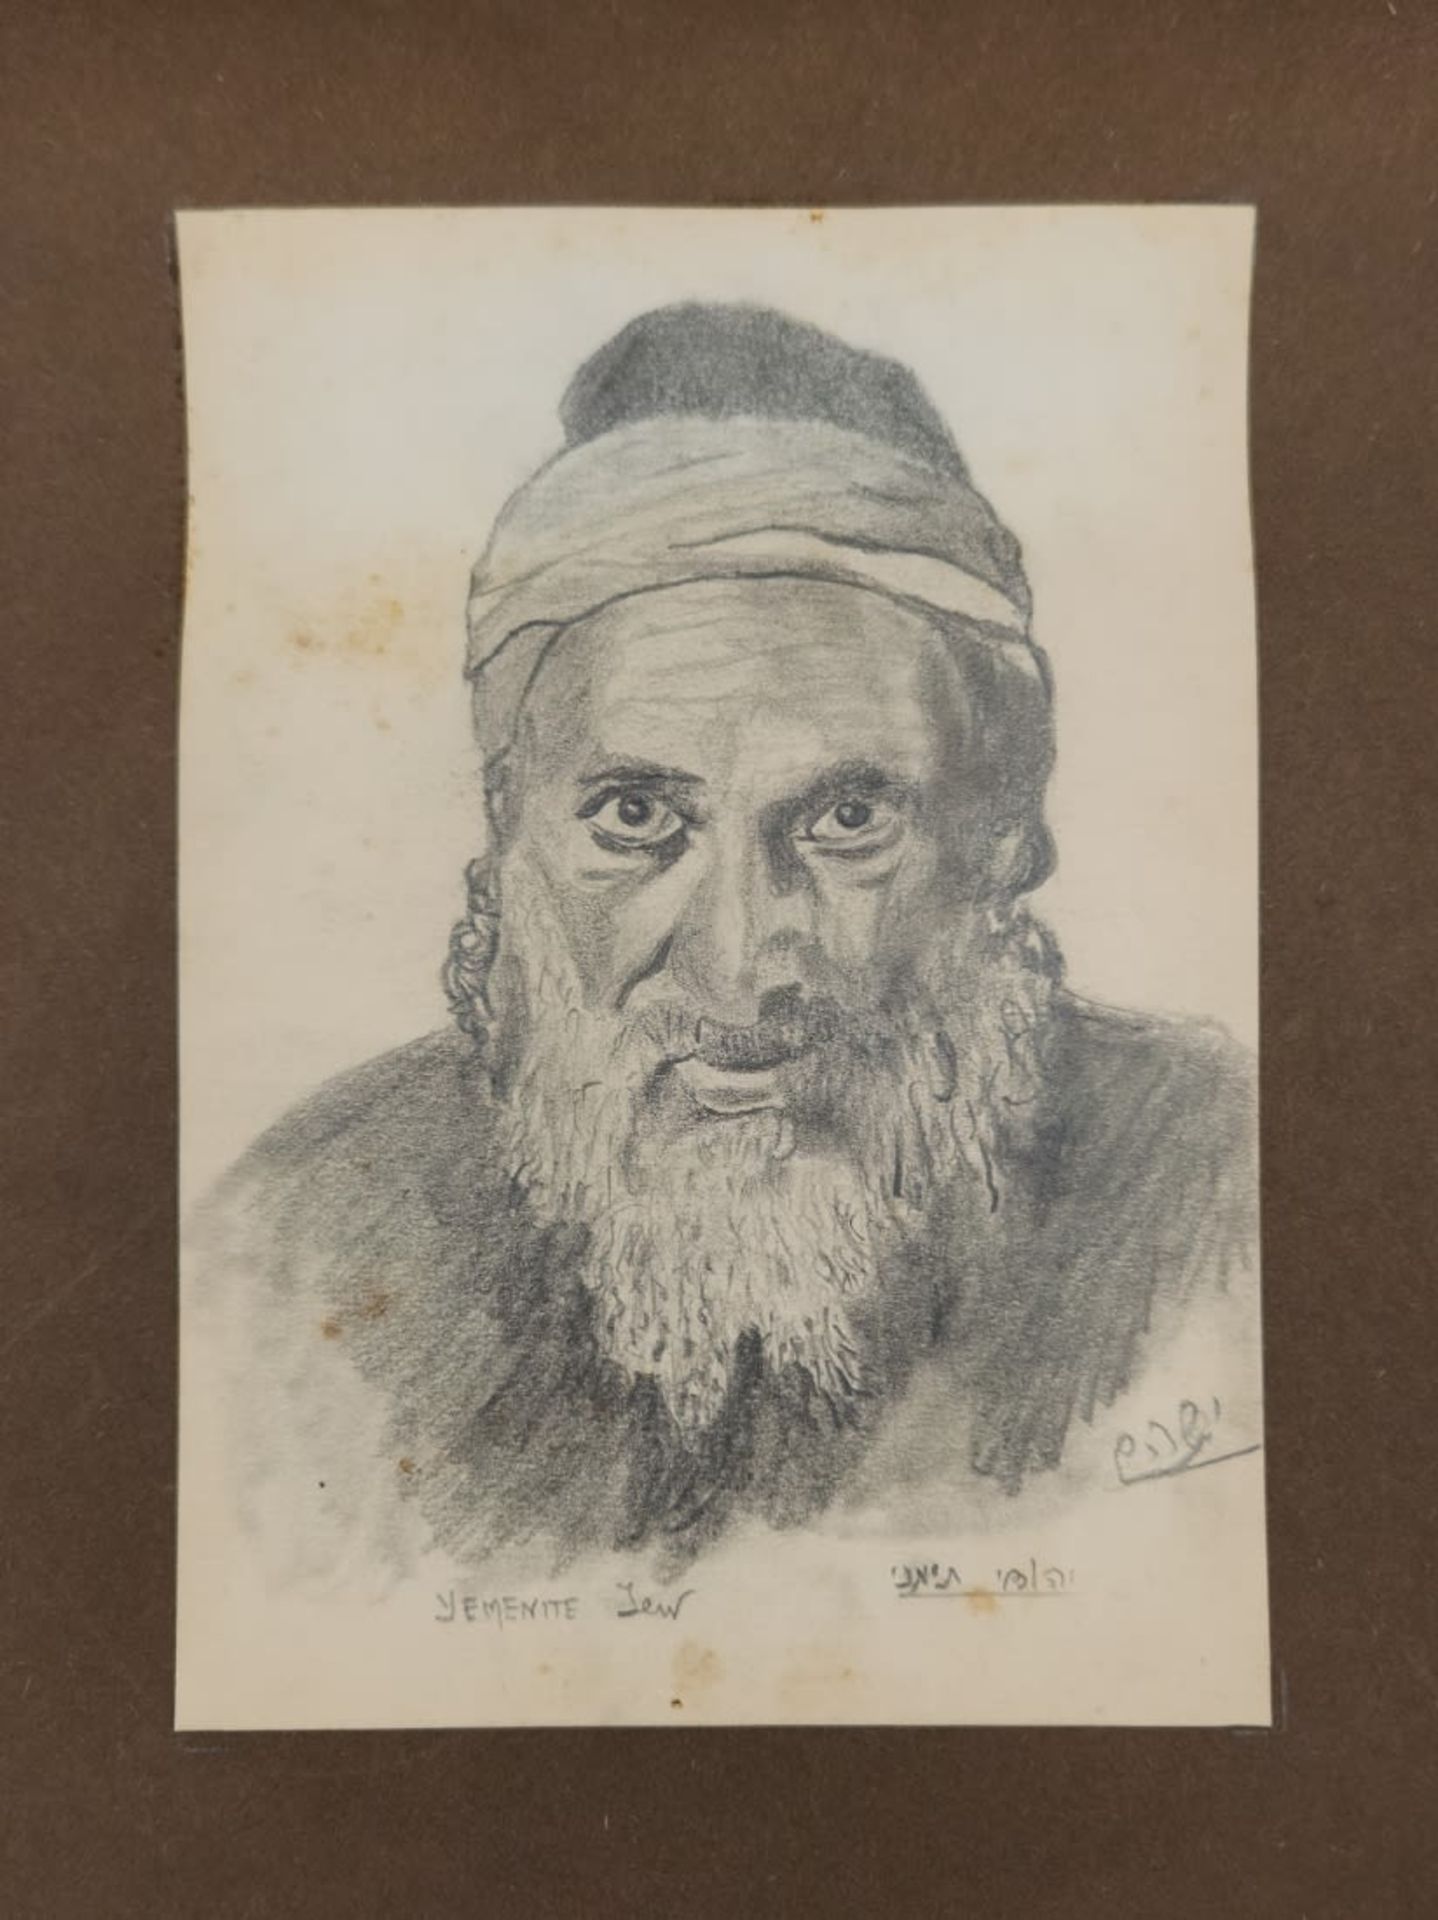 11 drawings of Jewish man, J. Shoham, pencil on paper, some stains, signed: J. Shoham pasted in an - Image 3 of 12